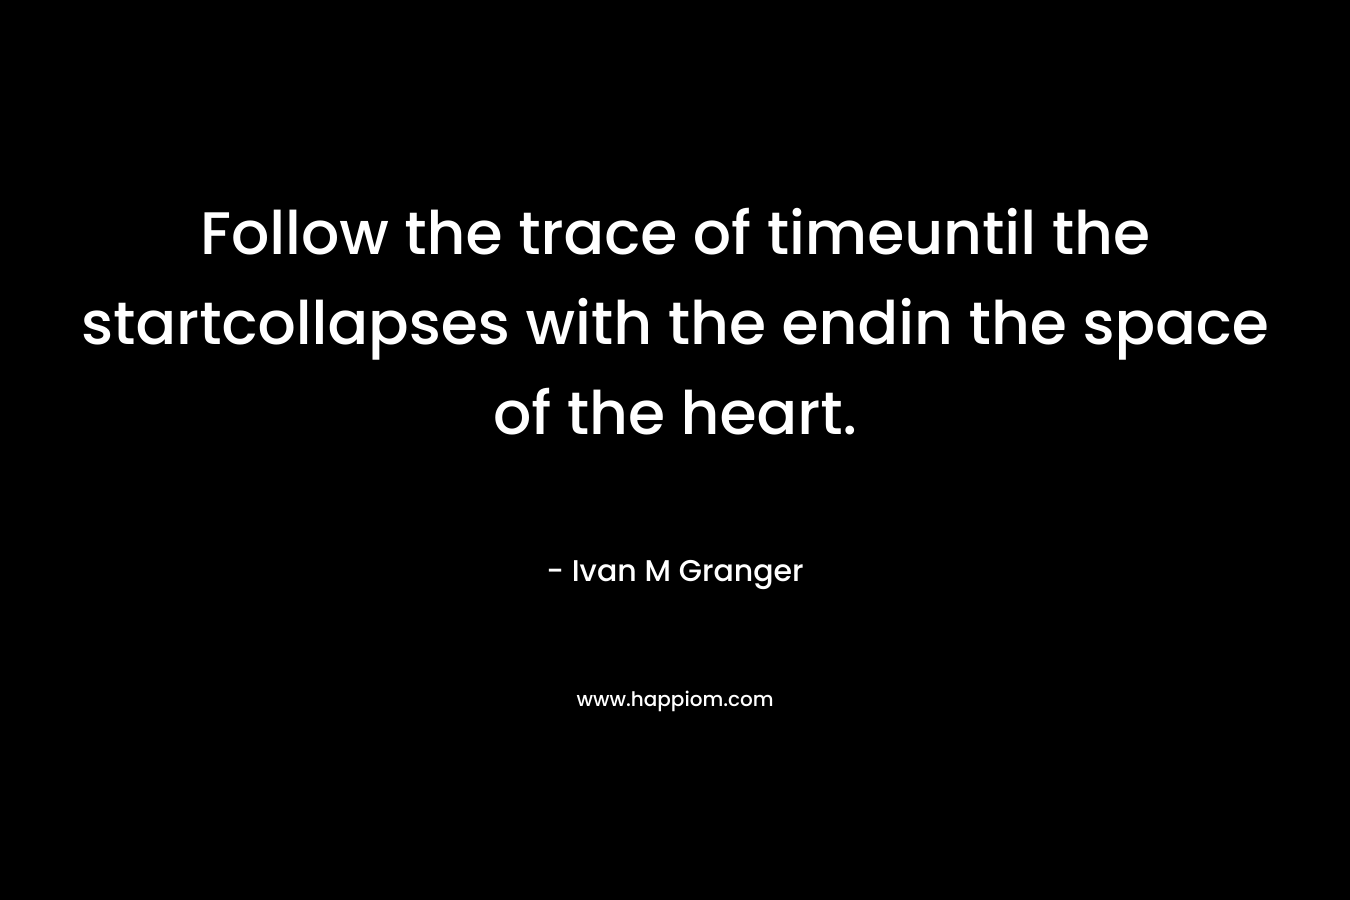 Follow the trace of timeuntil the startcollapses with the endin the space of the heart. – Ivan M Granger